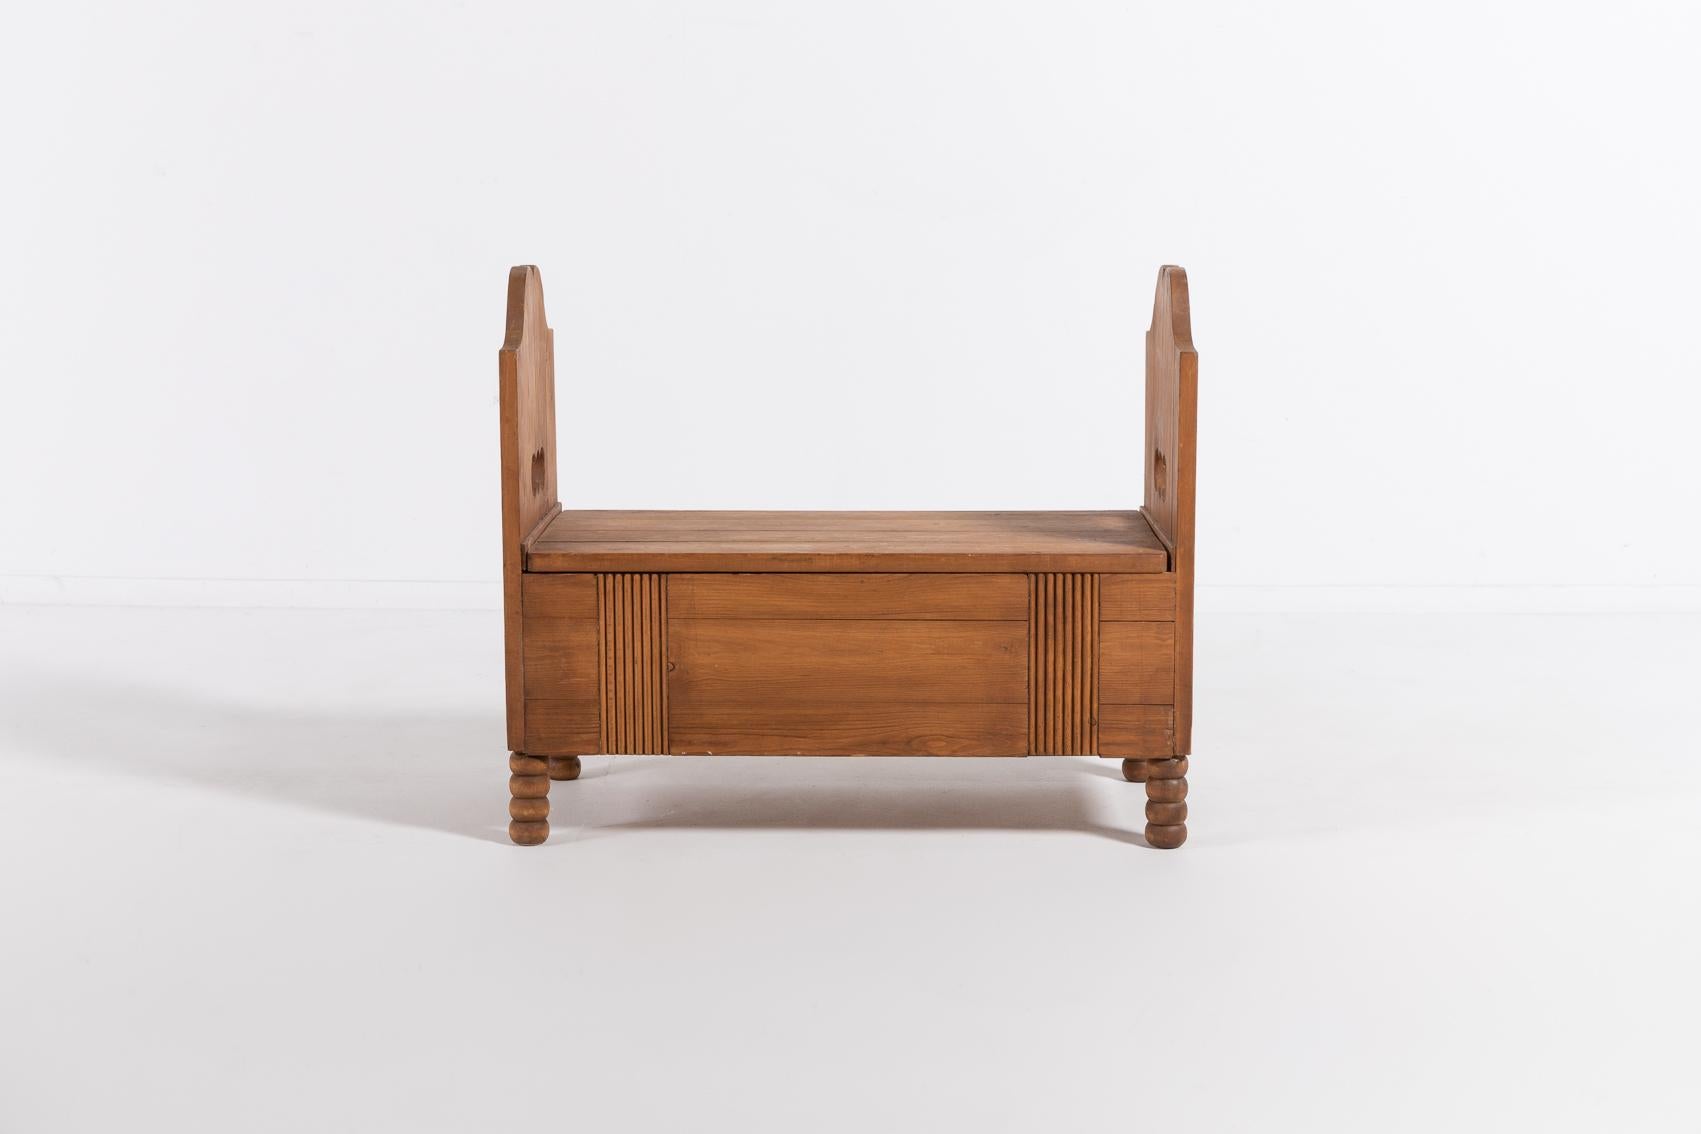 Small solid stained birch storage bench designed in 1910 by Eliel Saarinen for Munkkiniemi Pension. Nice wood work details, equipped with a flap seat.

Condition
Good, age related wear.

Dimensions
length: 75 cm
width: 36 cm
height: 63 cm
seat